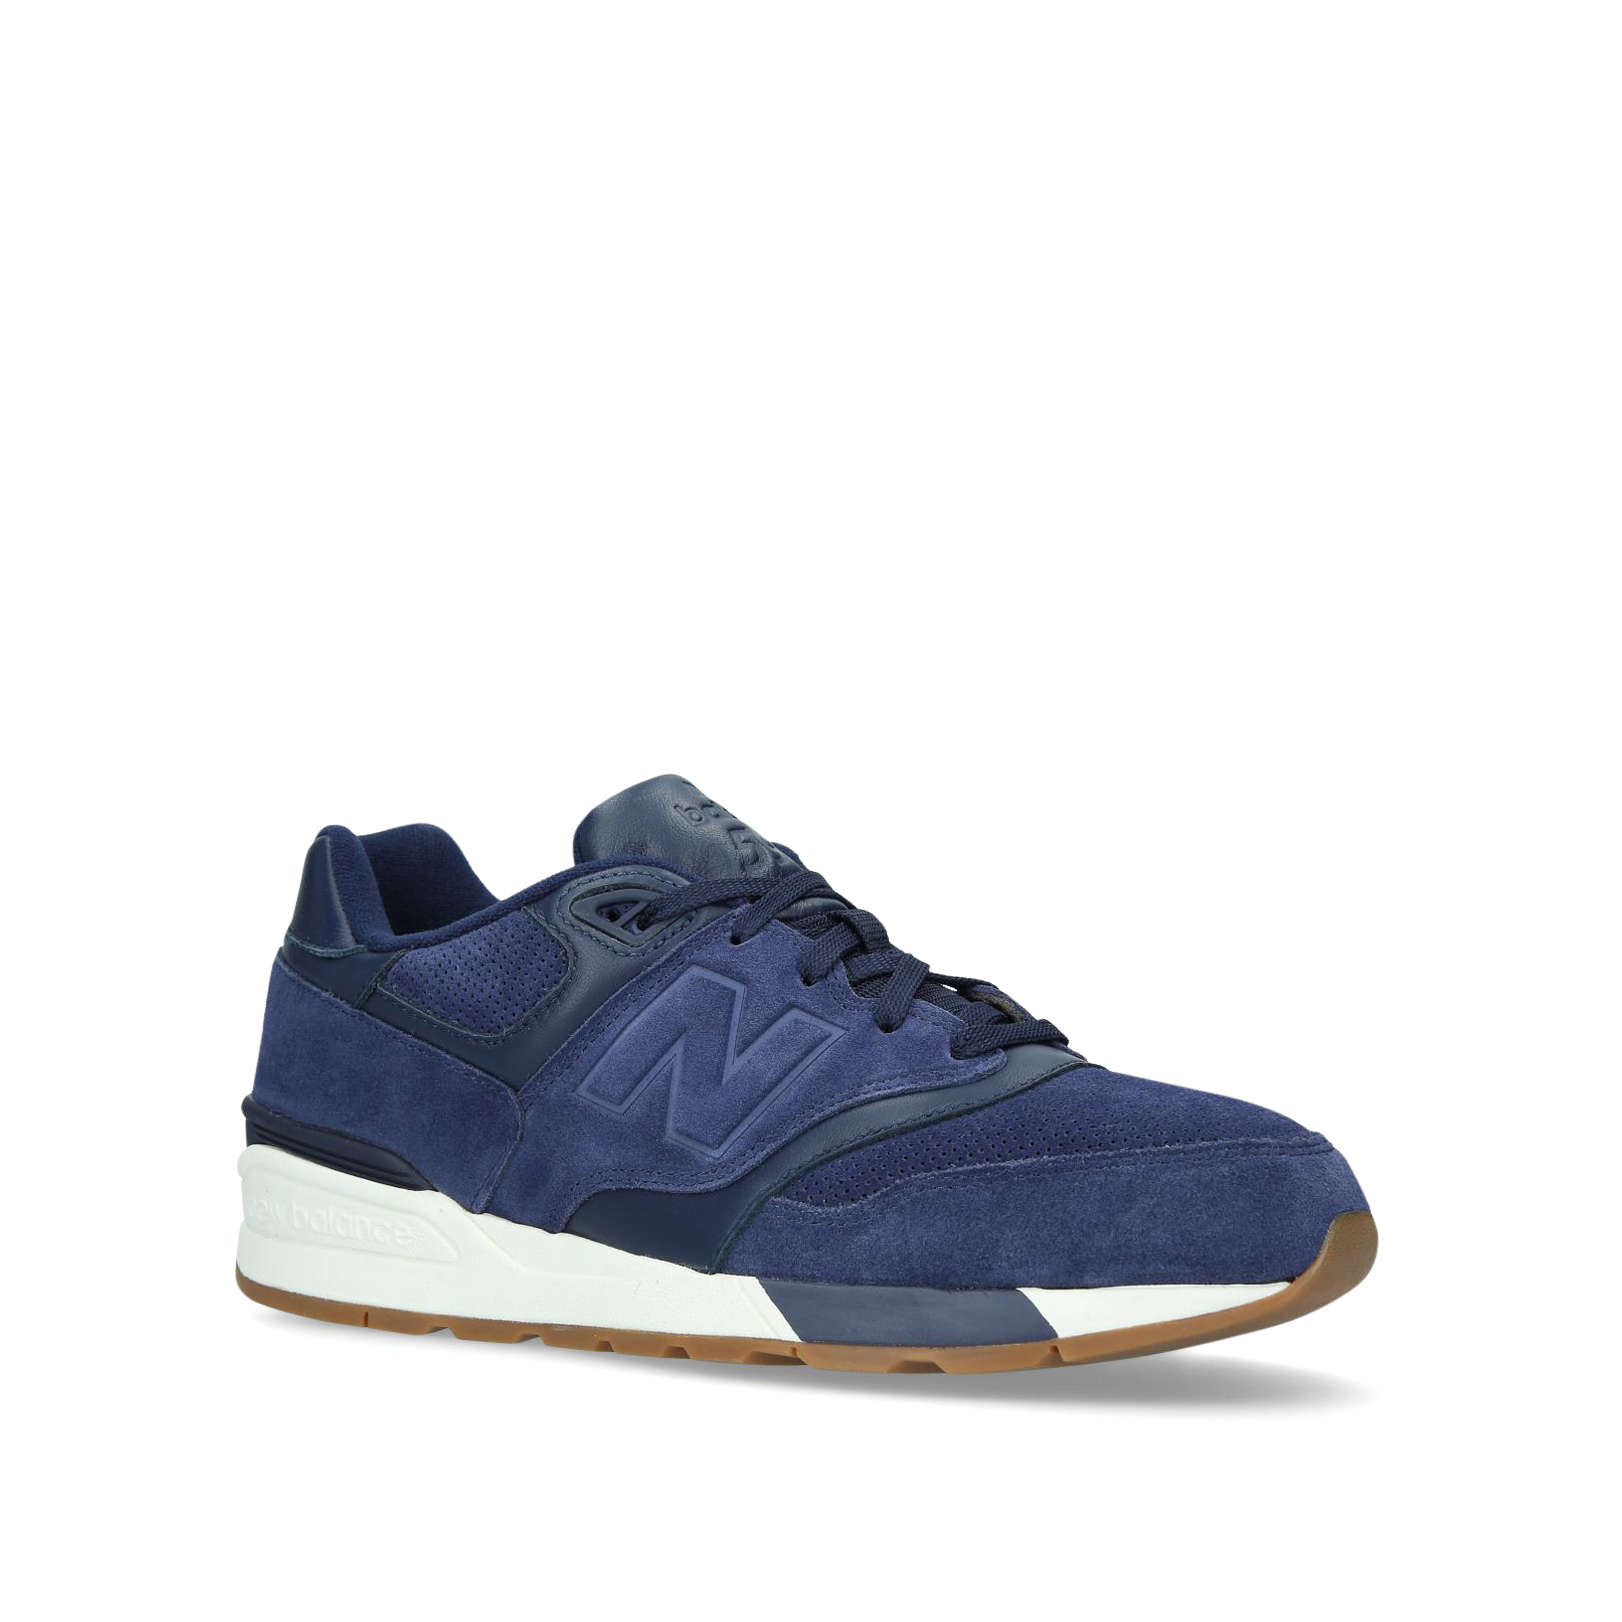 957 SUEDE - NEW BALANCE Sneakers